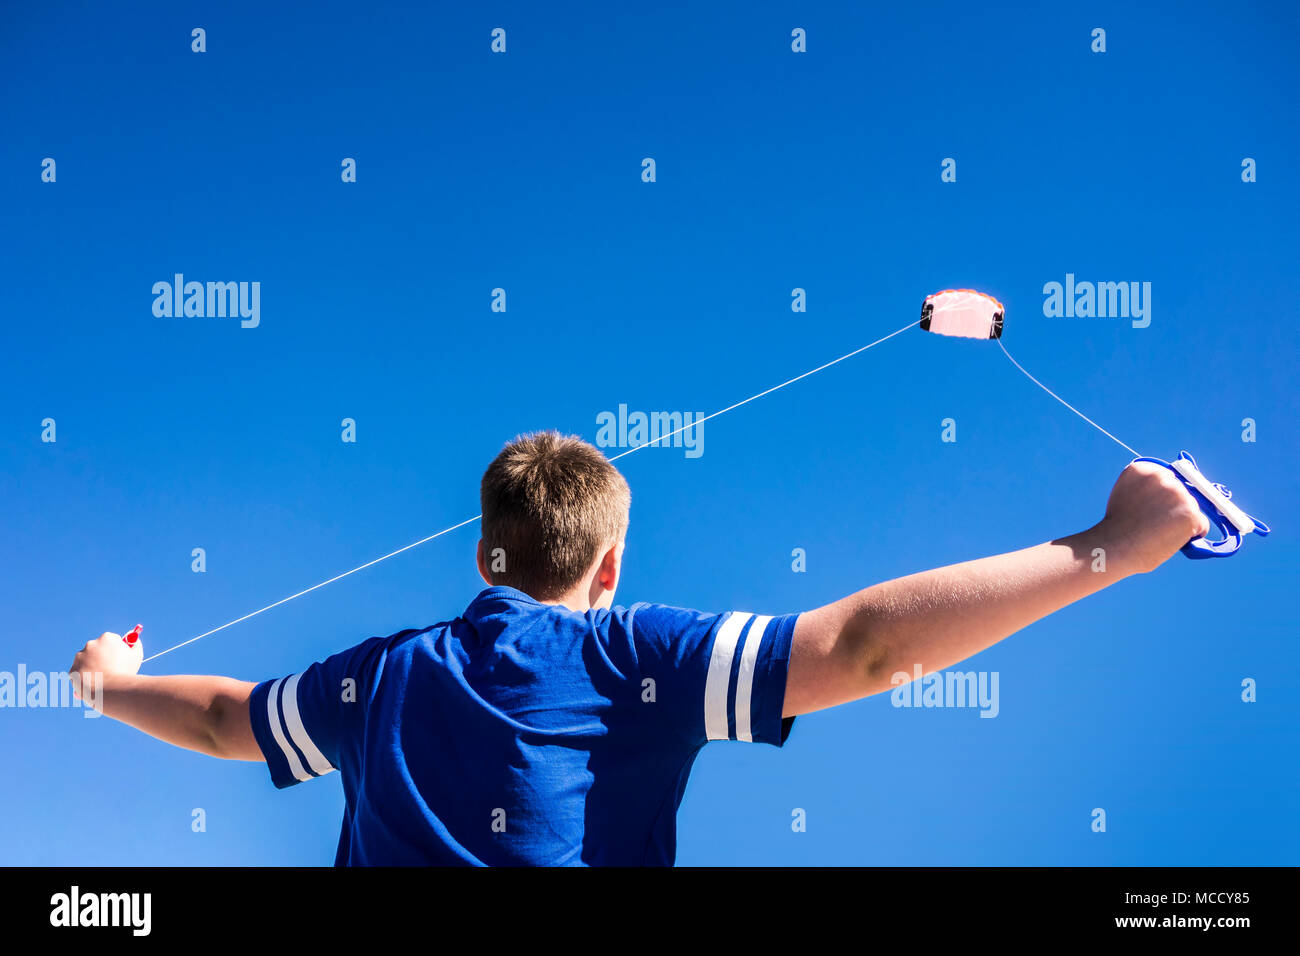 Child flying a kite in the clear blue sky. Stock Photo